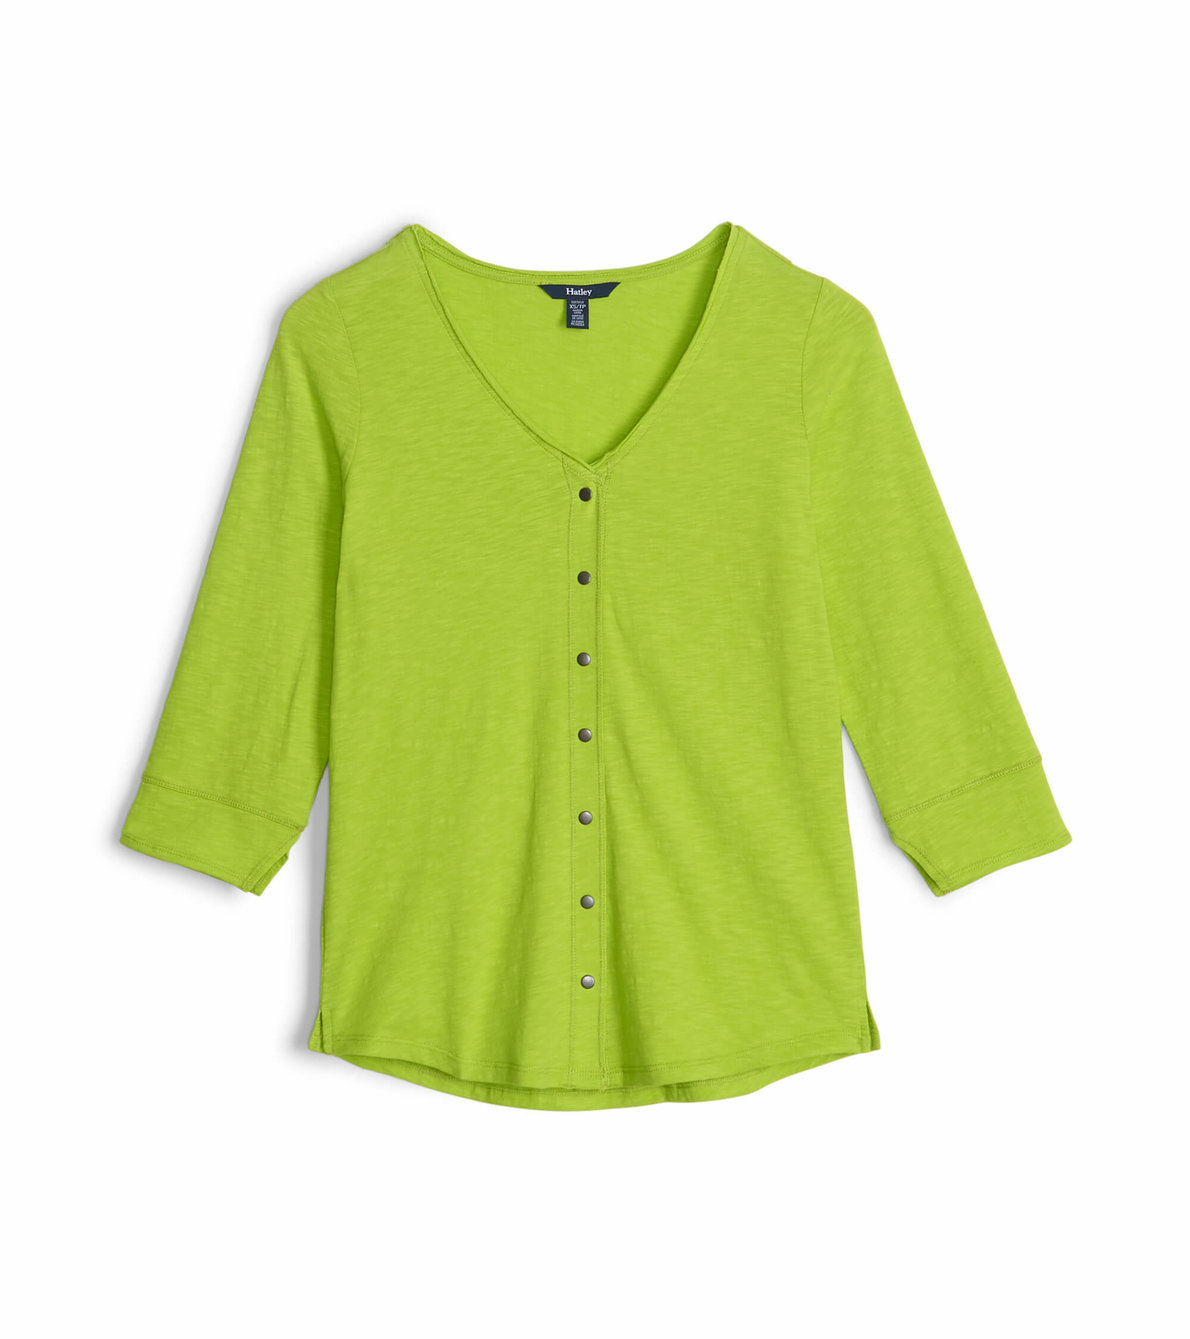 View larger image of V-Neck Top - Lime